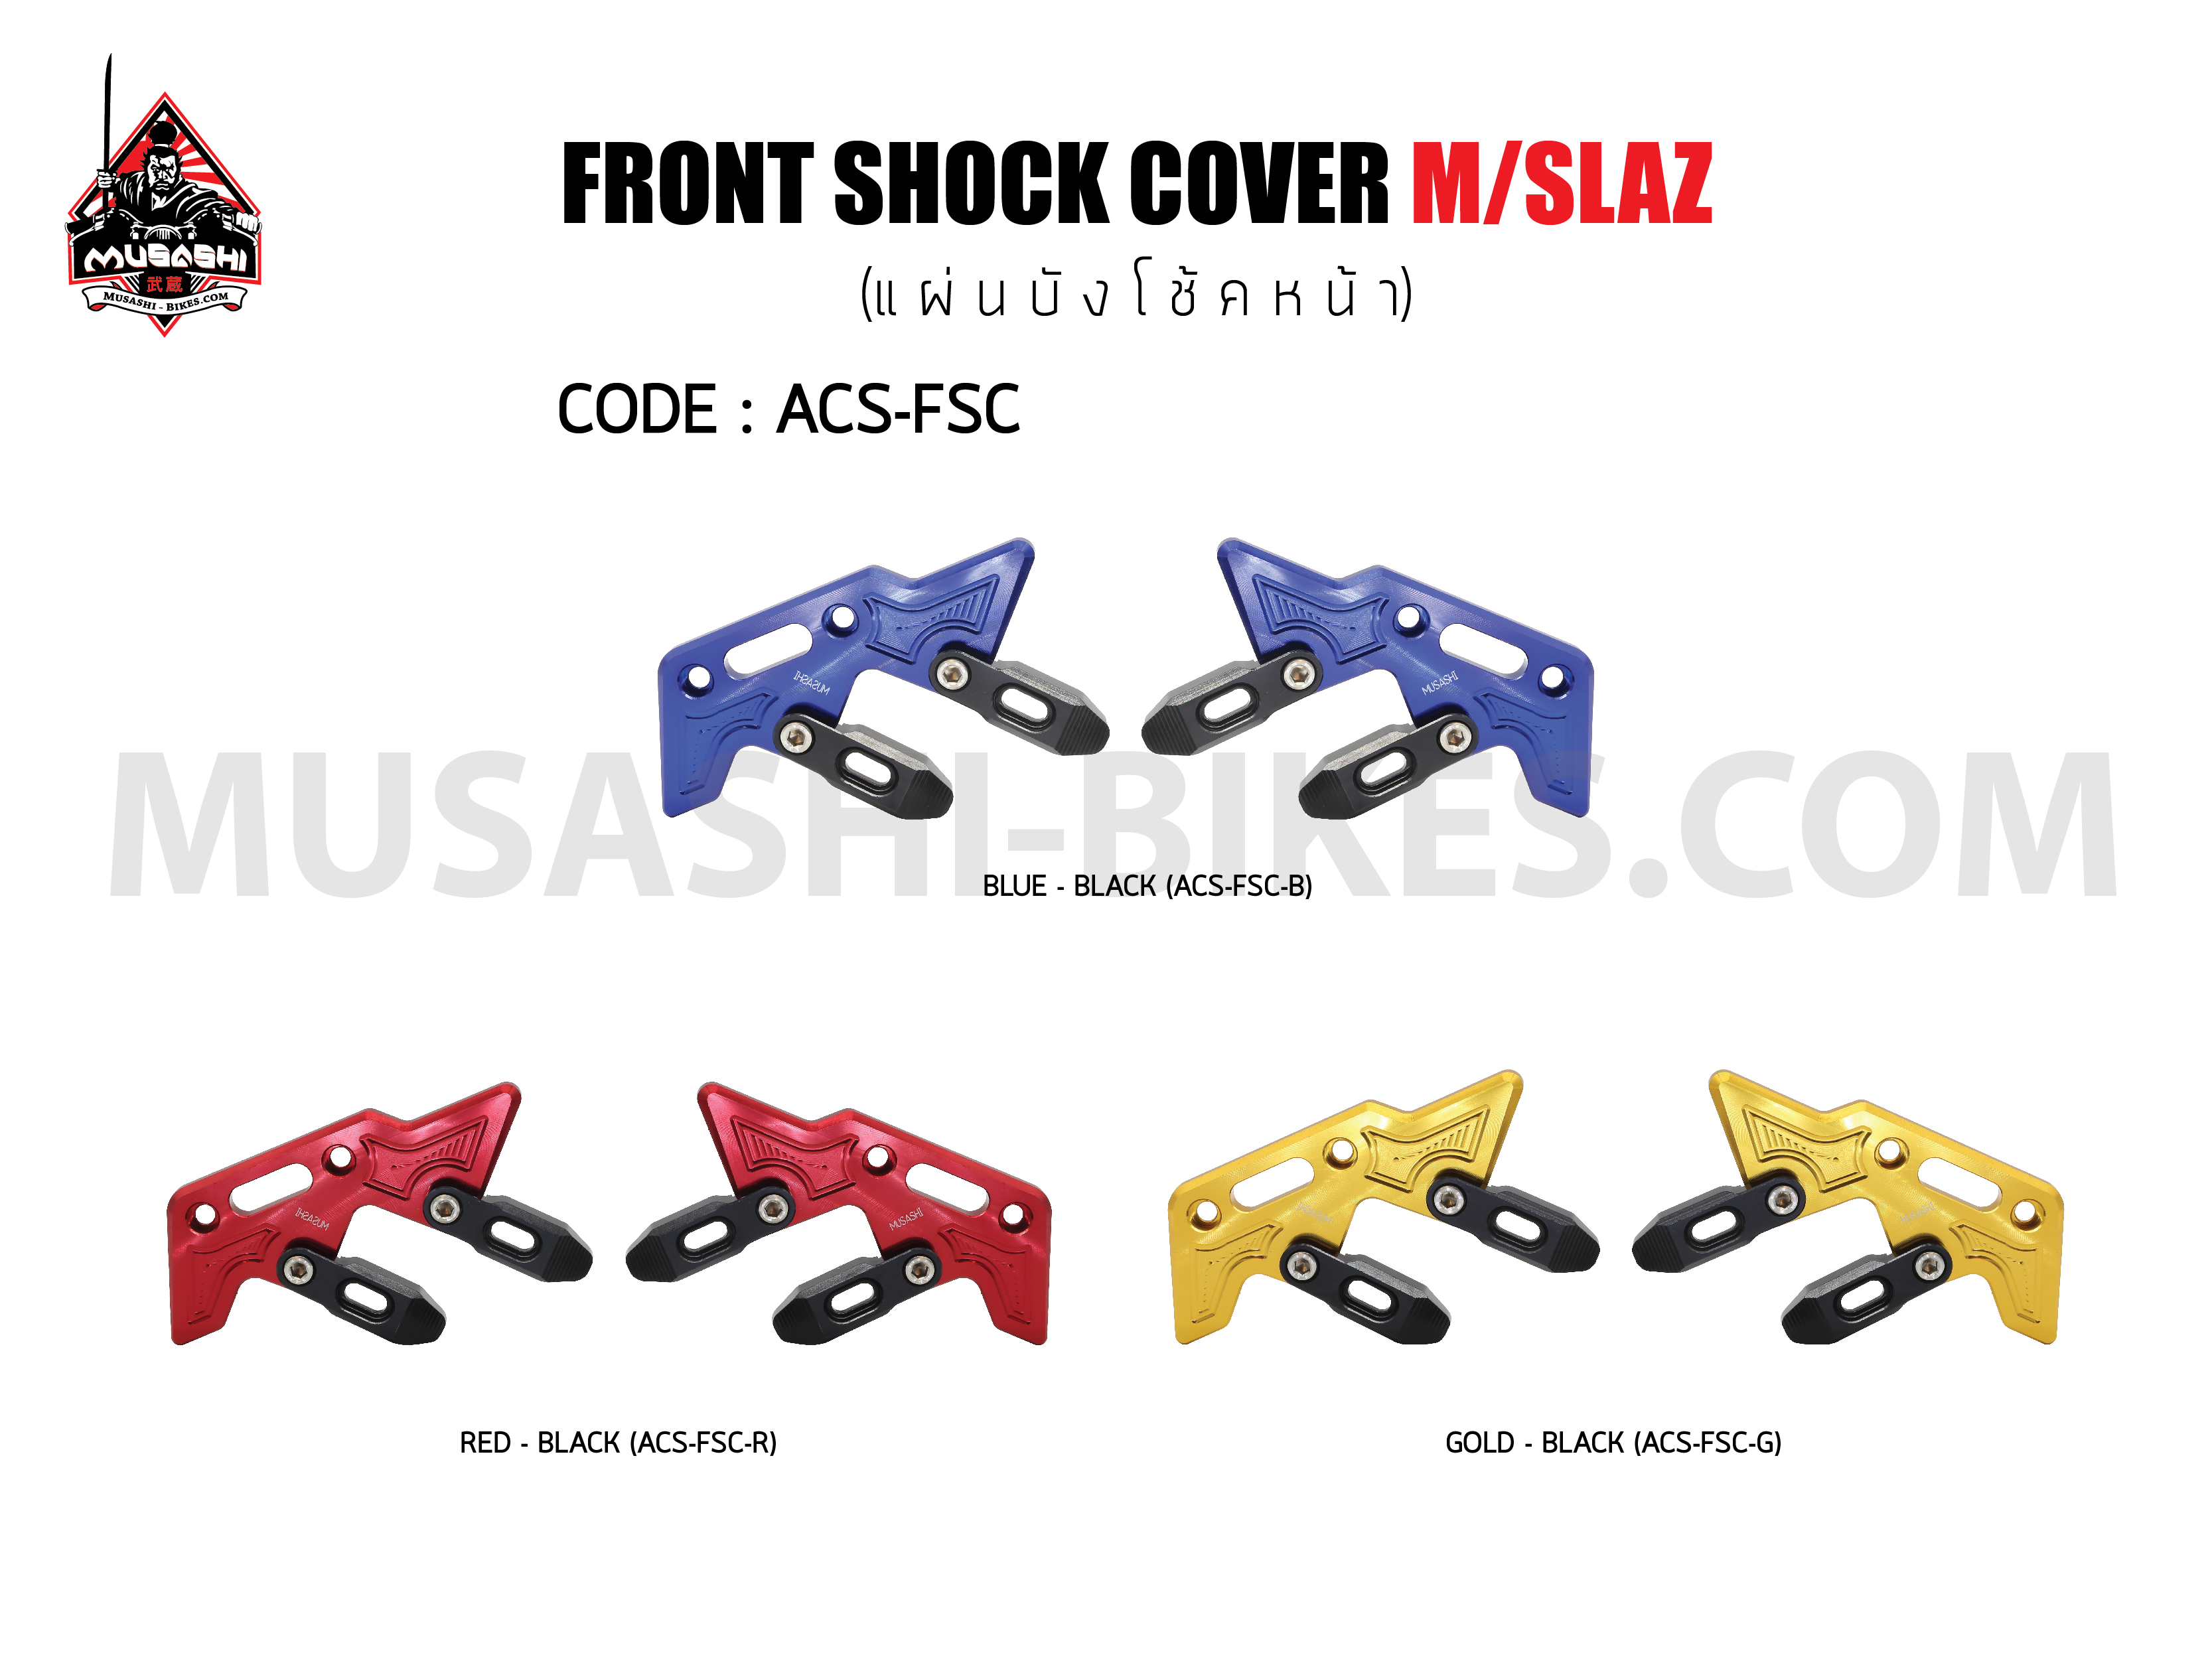 FRONT SHOCK COVER